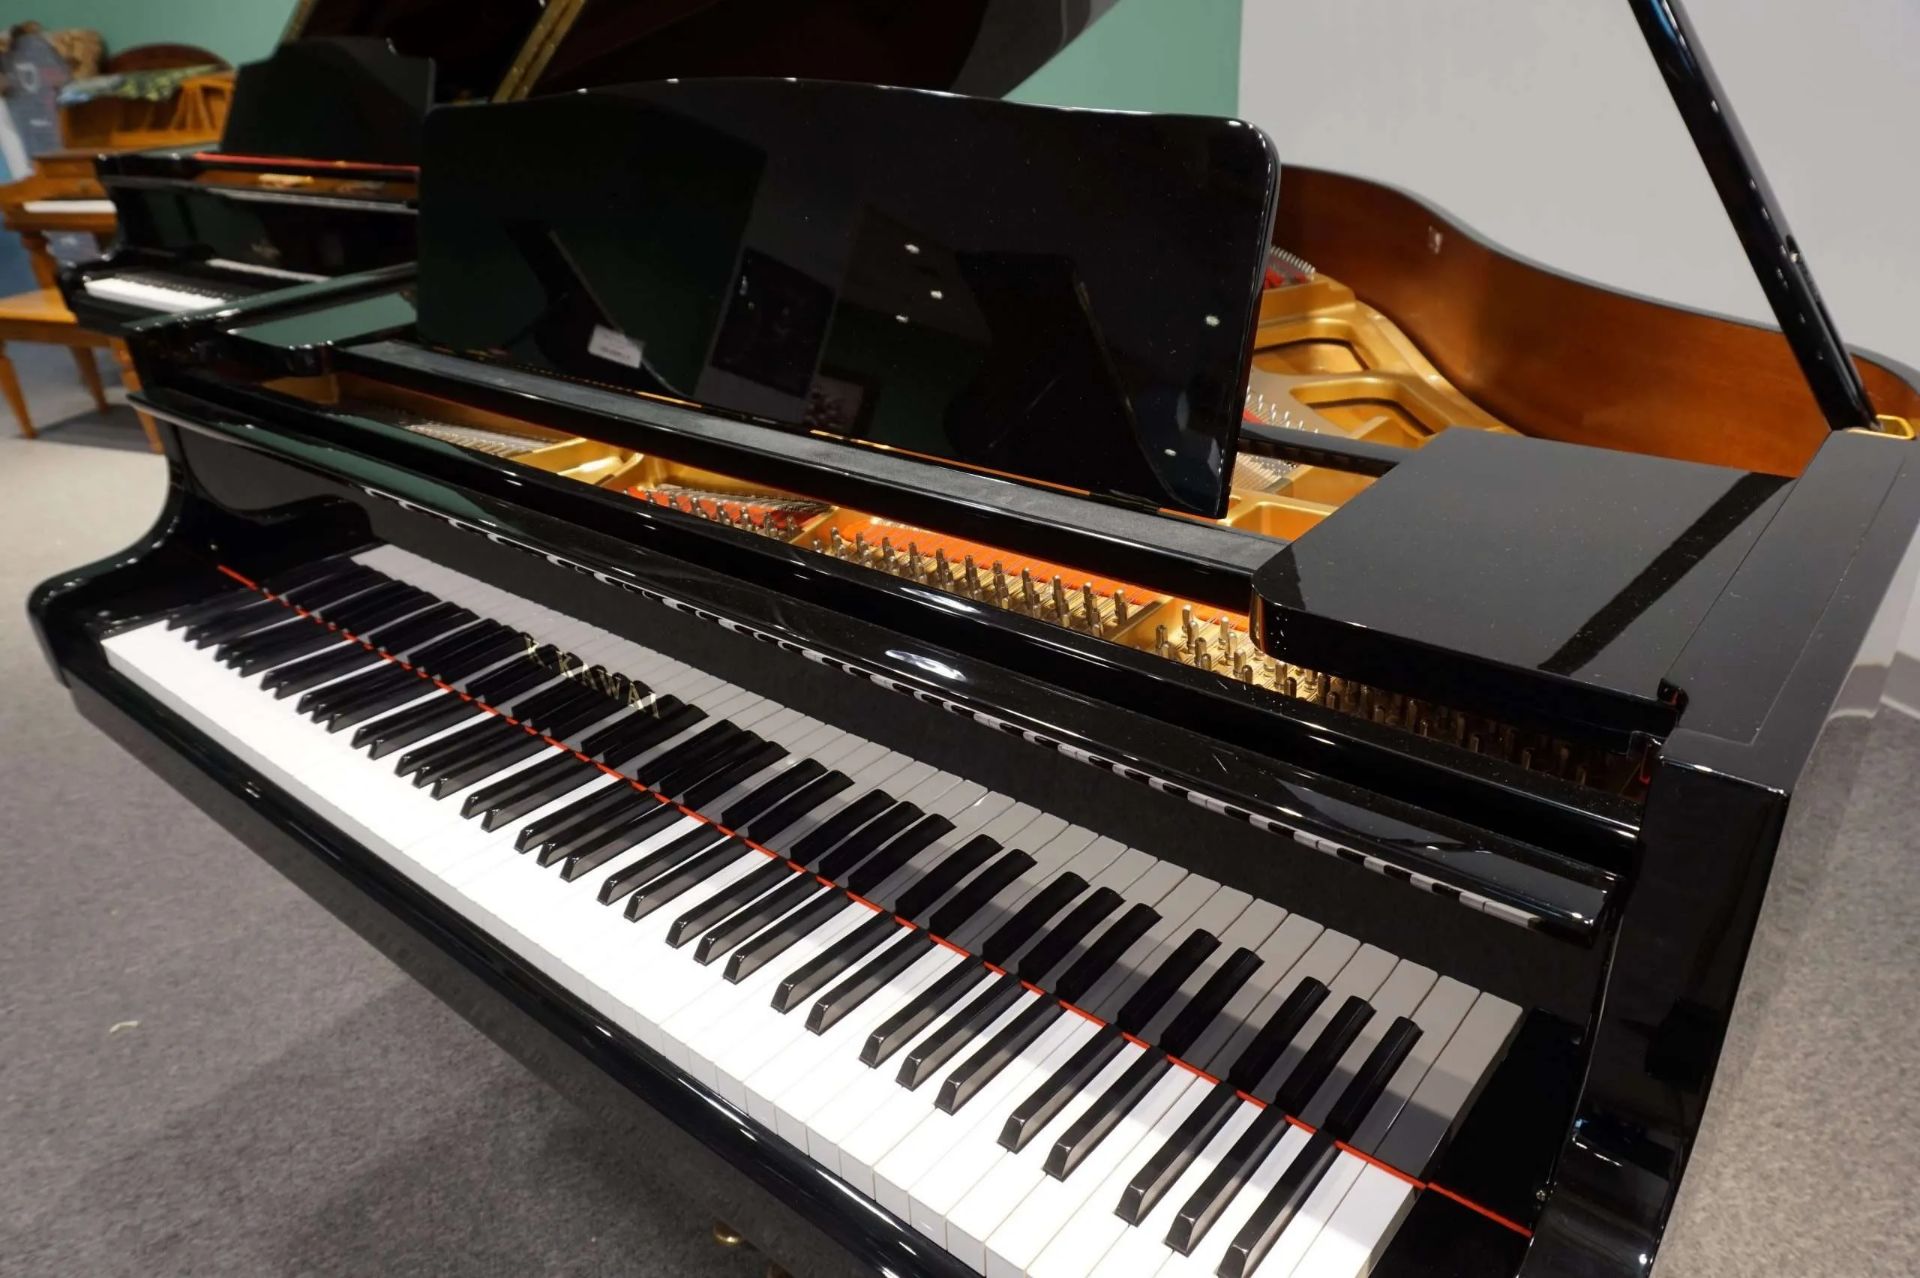 Kawai GM-10K Baby Grand Piano With Resonant Tone And Classic Good Looks, The GM-10K Offers